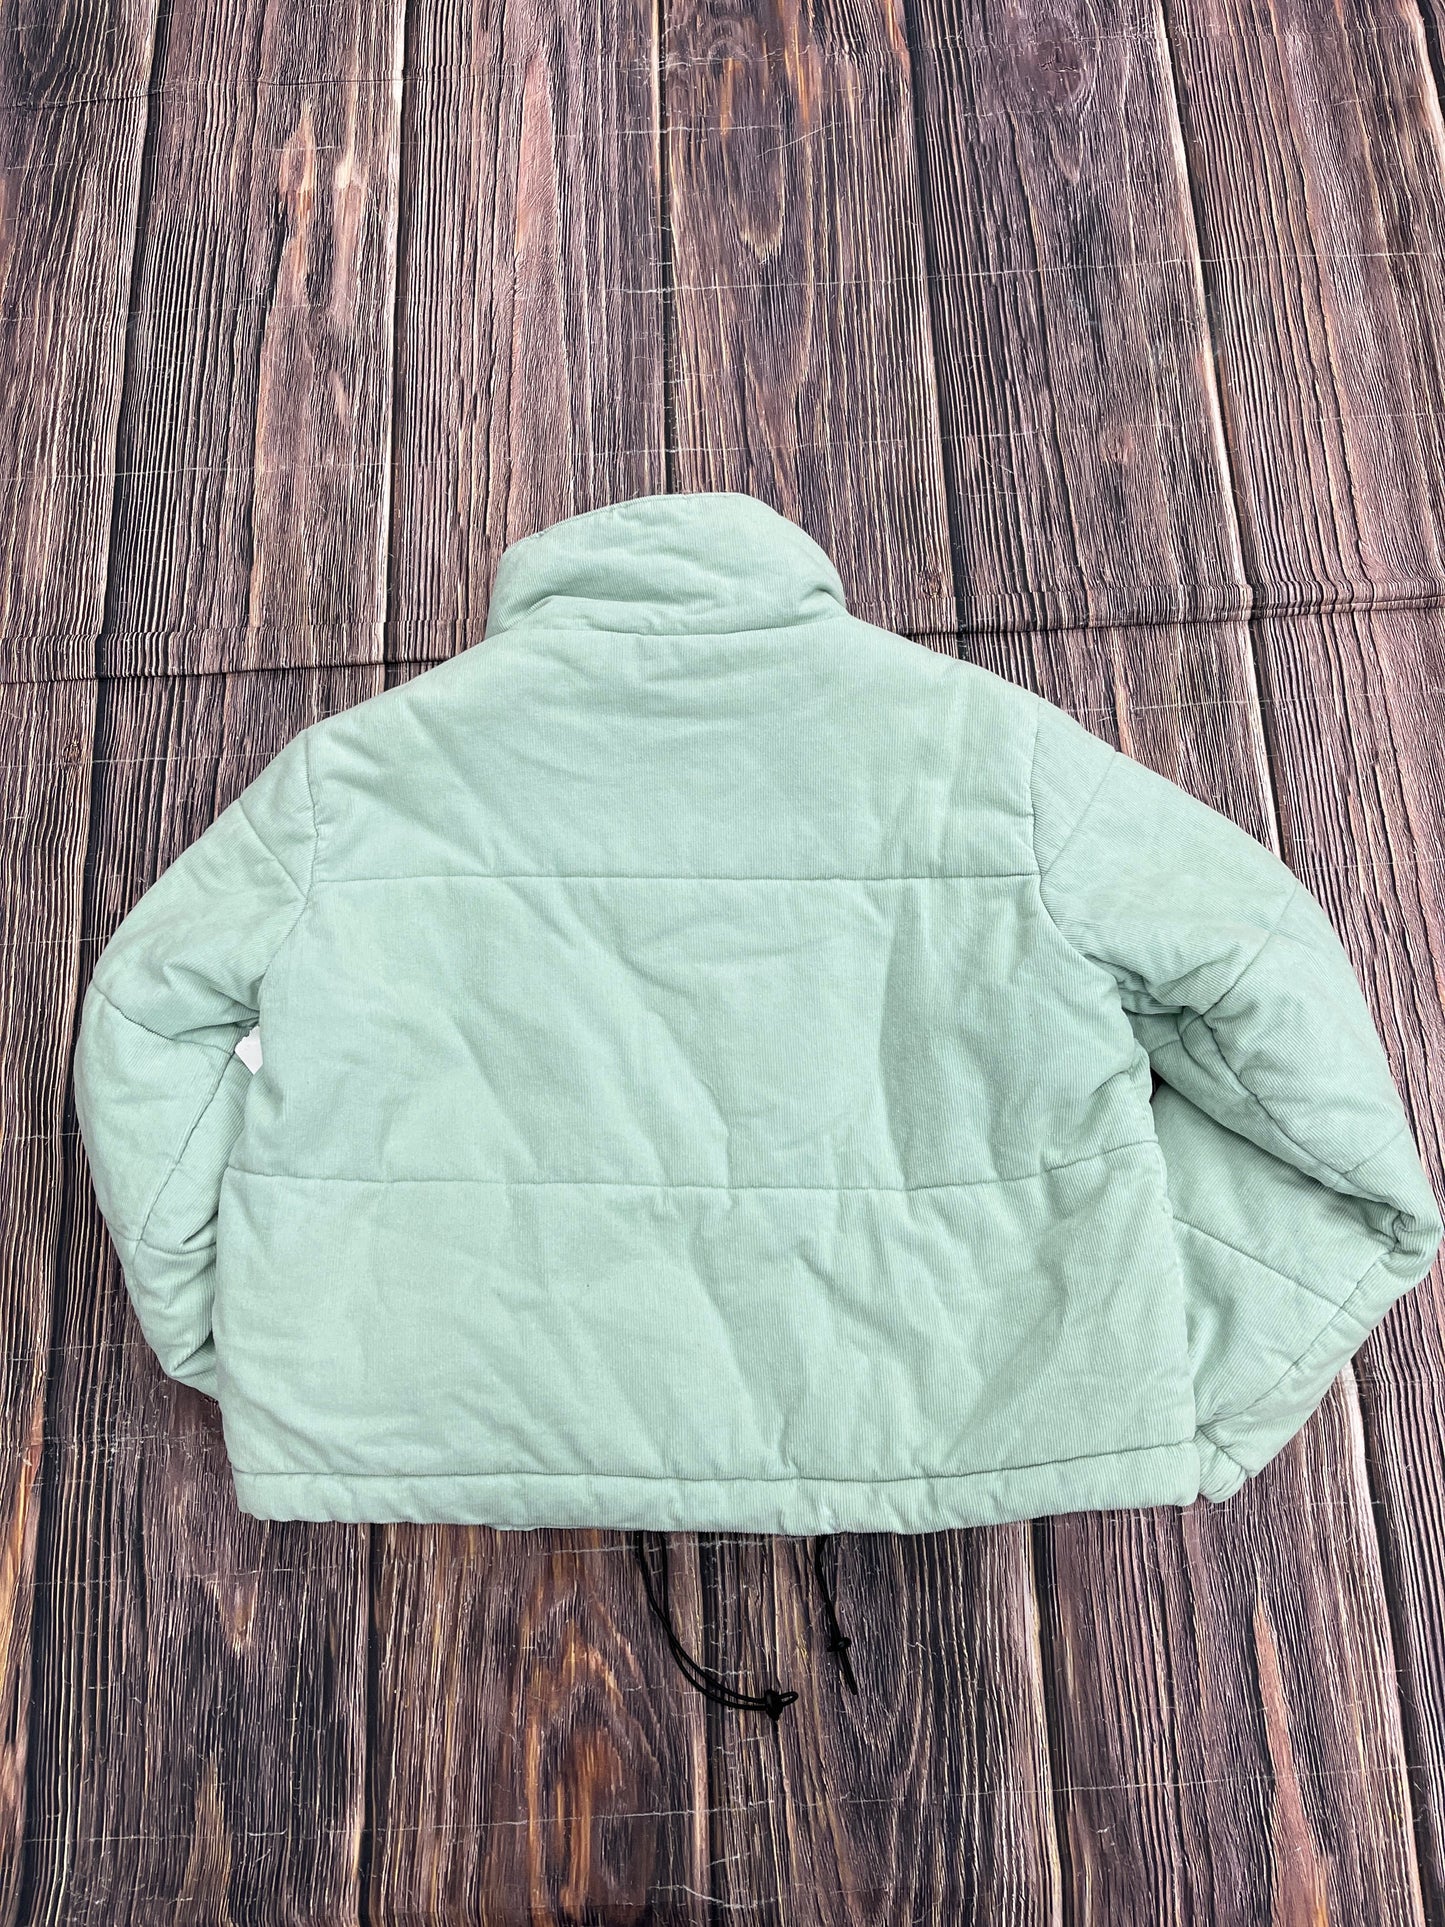 Jacket Other By Clothes Mentor  Size: S